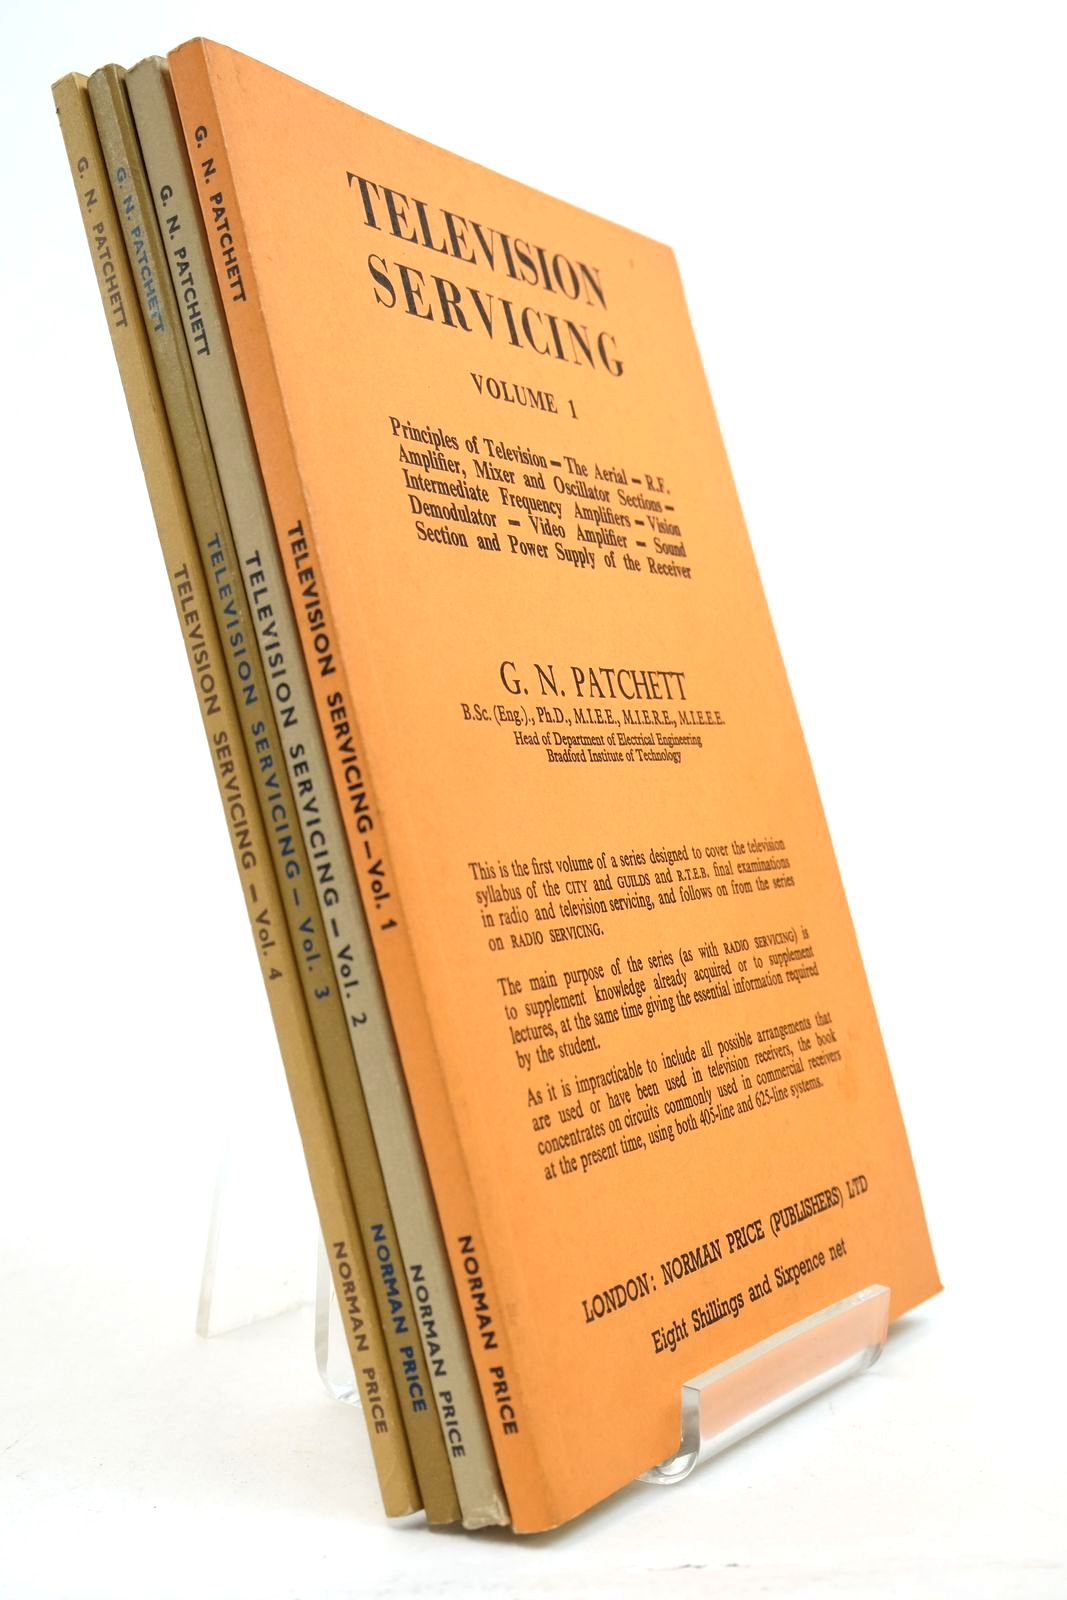 Photo of TELEVISION SERVICING (4 VOLUMES) written by Patchett, G.N. published by Norman Price (publishers) Ltd (STOCK CODE: 2140310)  for sale by Stella & Rose's Books